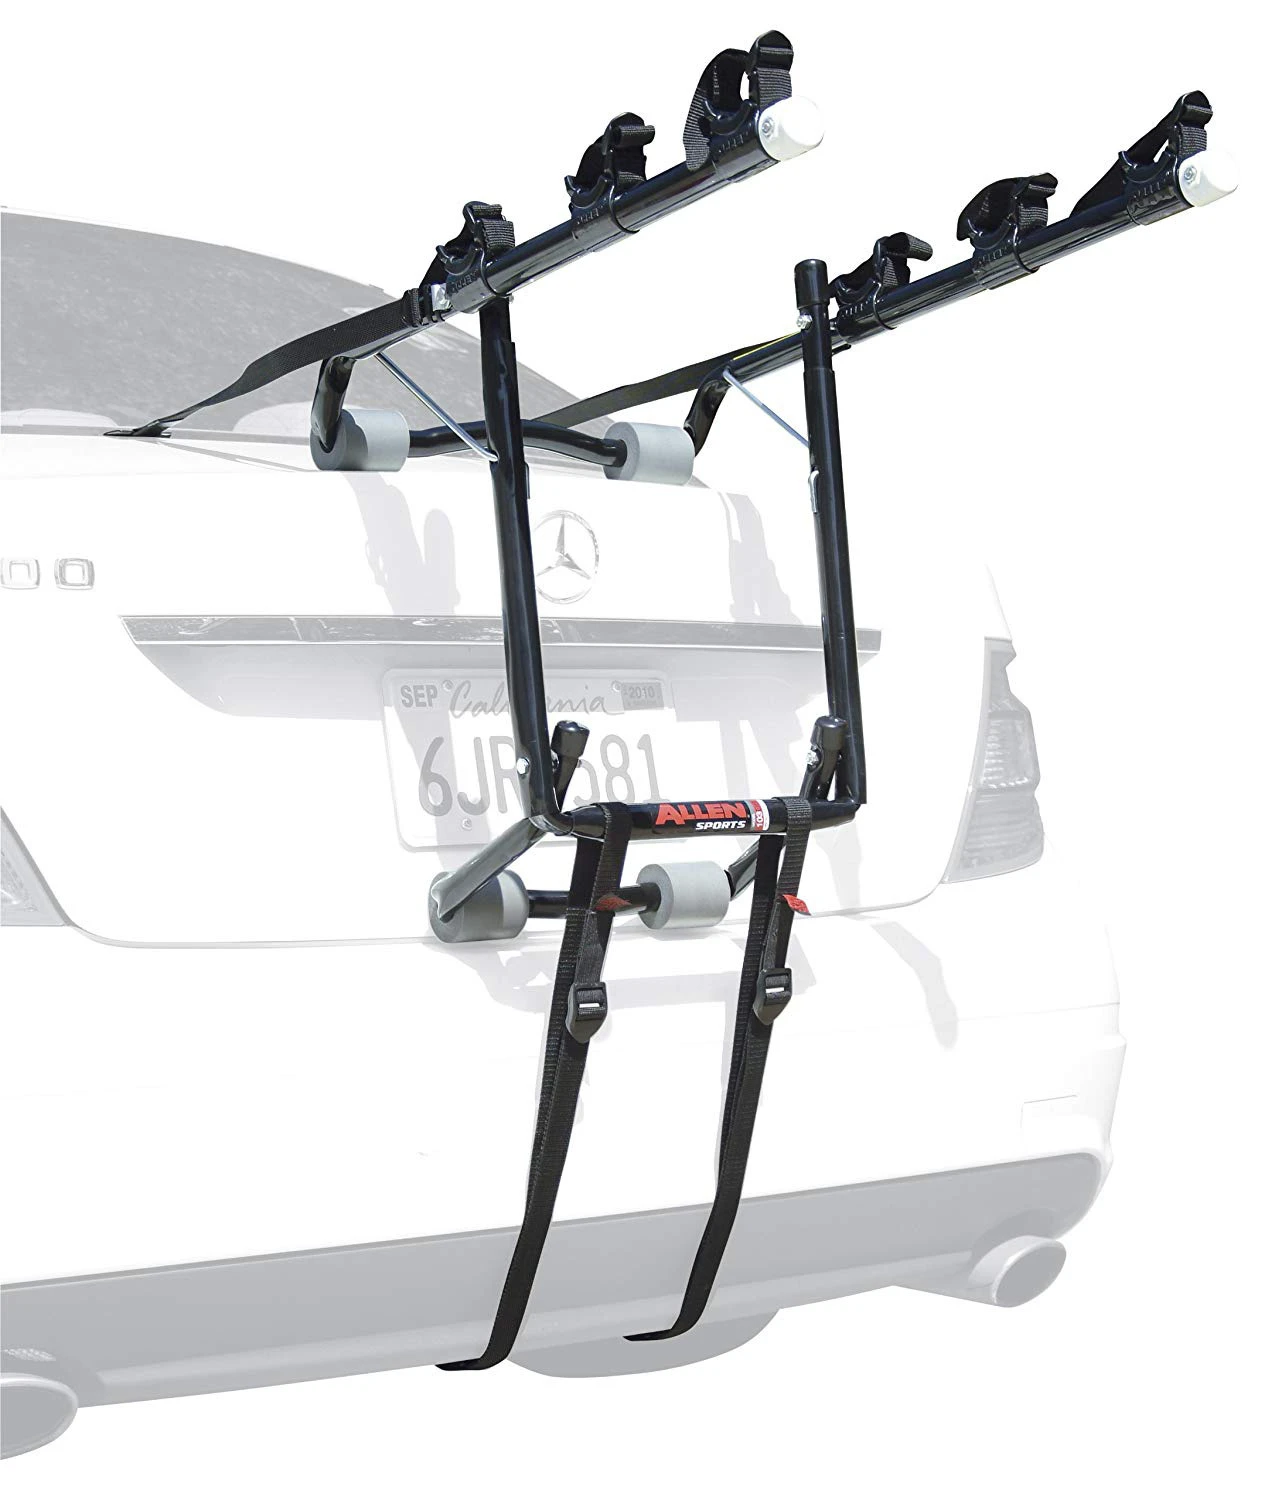 Strong 3 Universal Bike Rear Mount Car Rack Bicycle Cycle Carrier